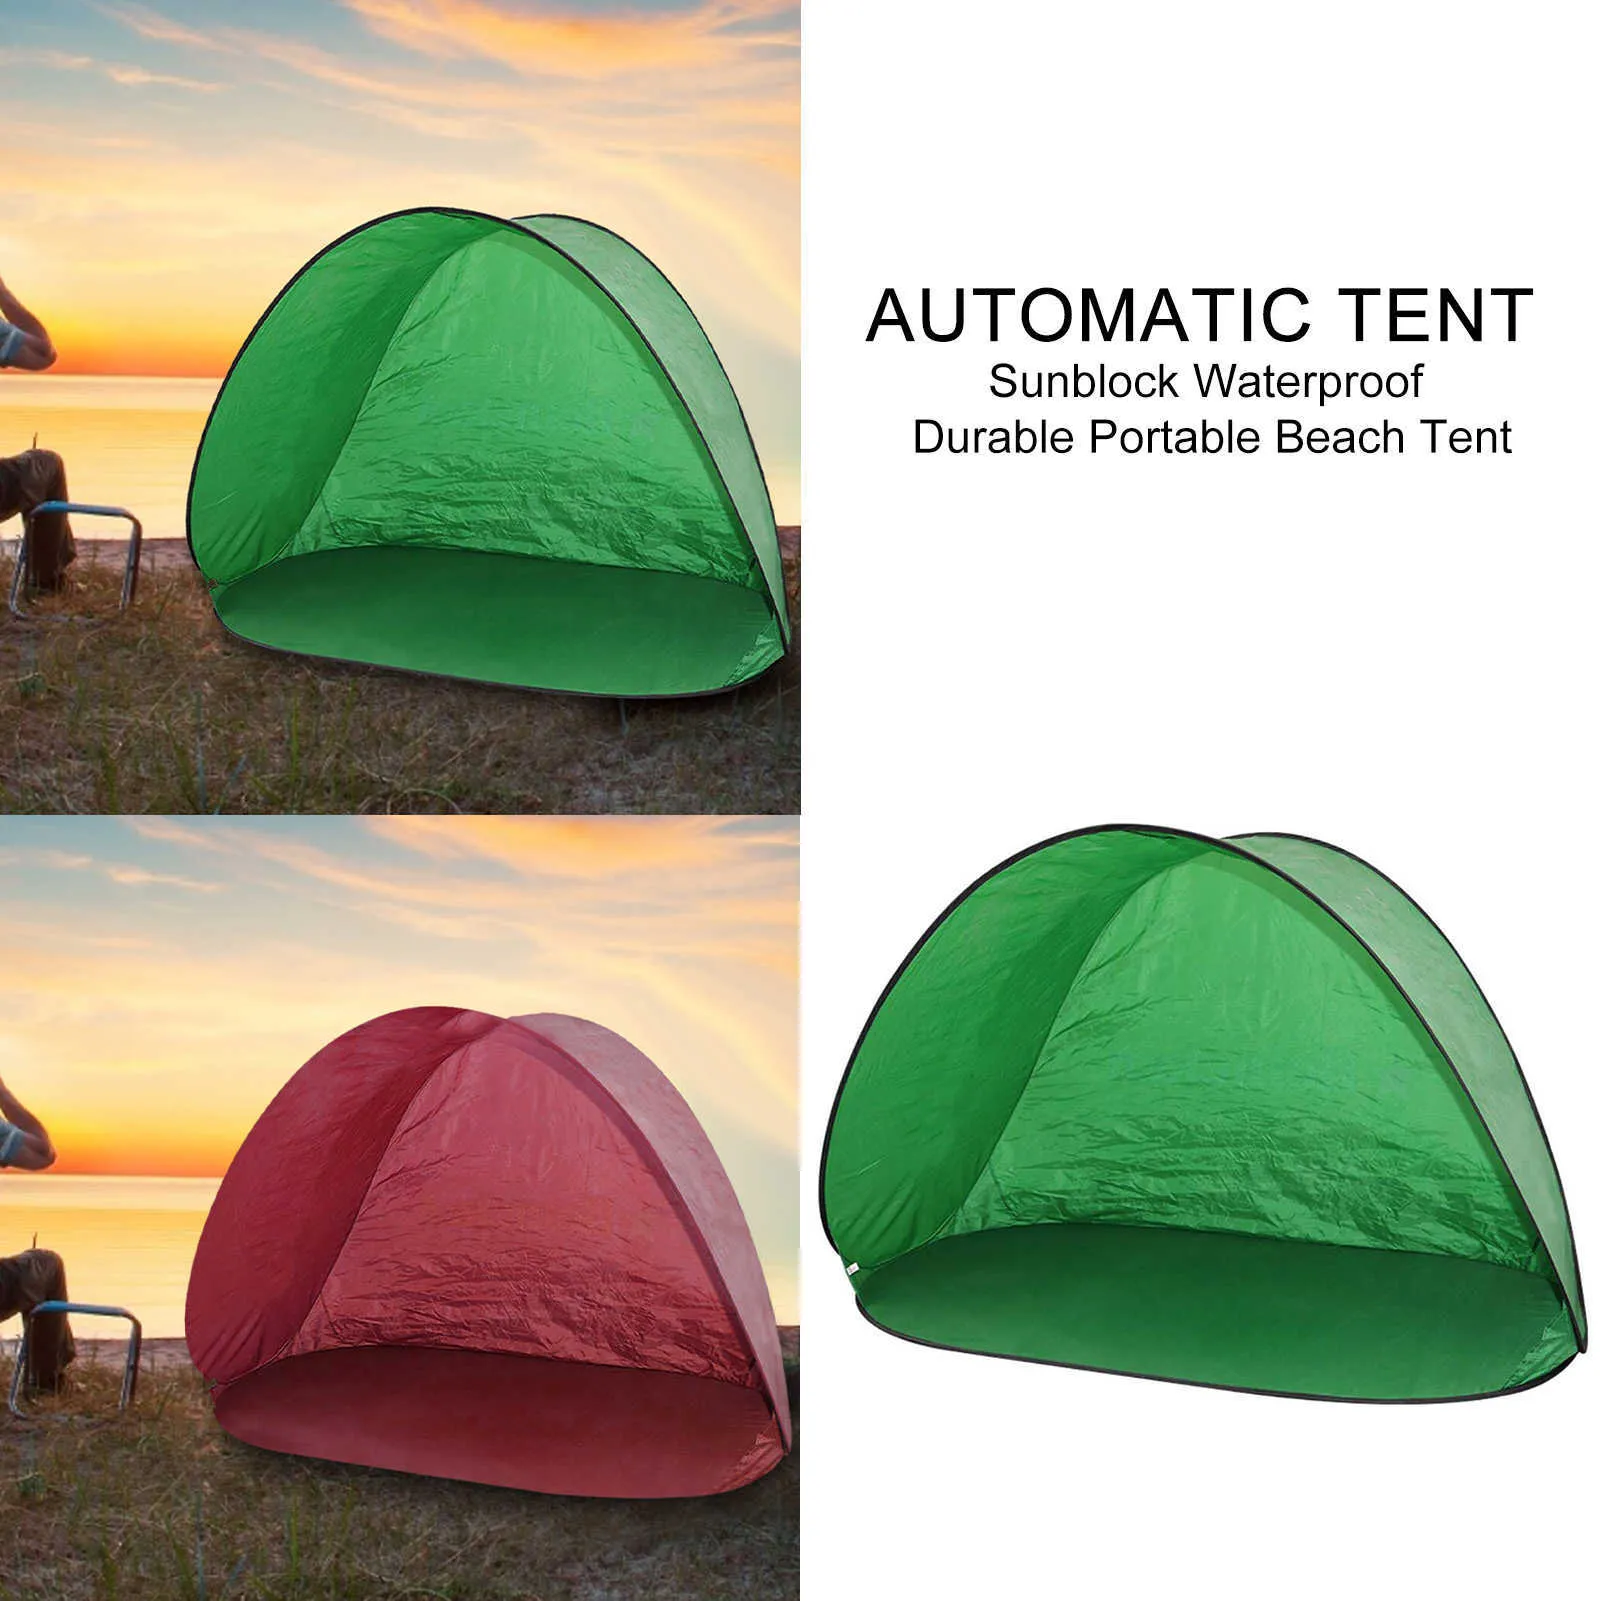 Automatic Tent Sunblock Waterproof Durable Portable Beach Tent Camping Fishing Tent Anti-ultraviolet Light Awning Y0706